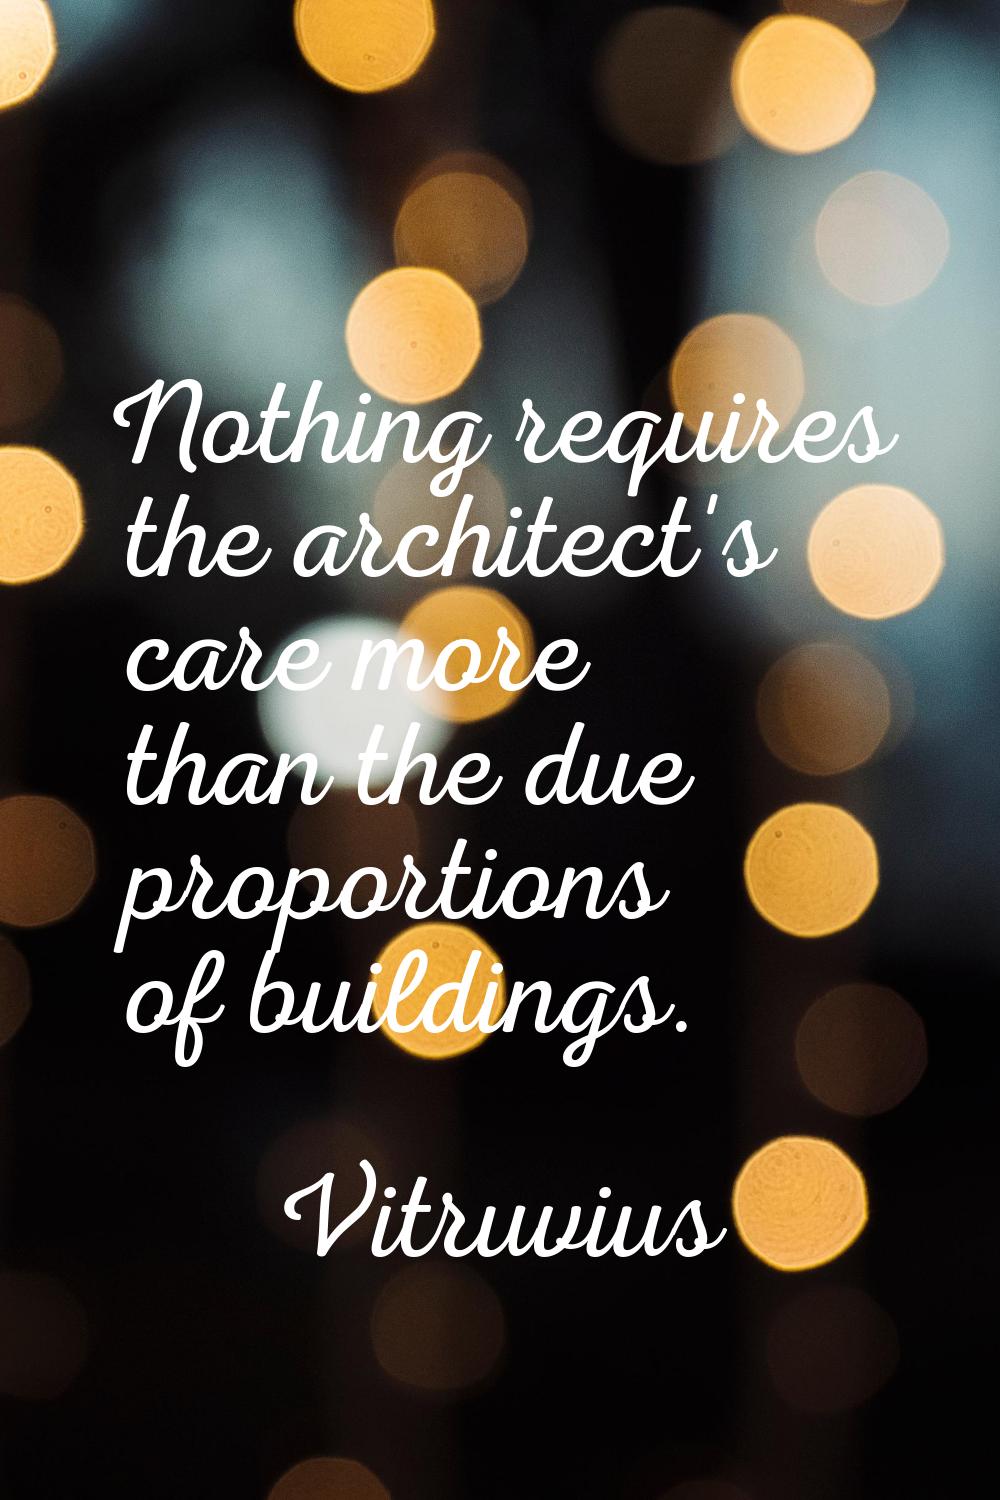 Nothing requires the architect's care more than the due proportions of buildings.